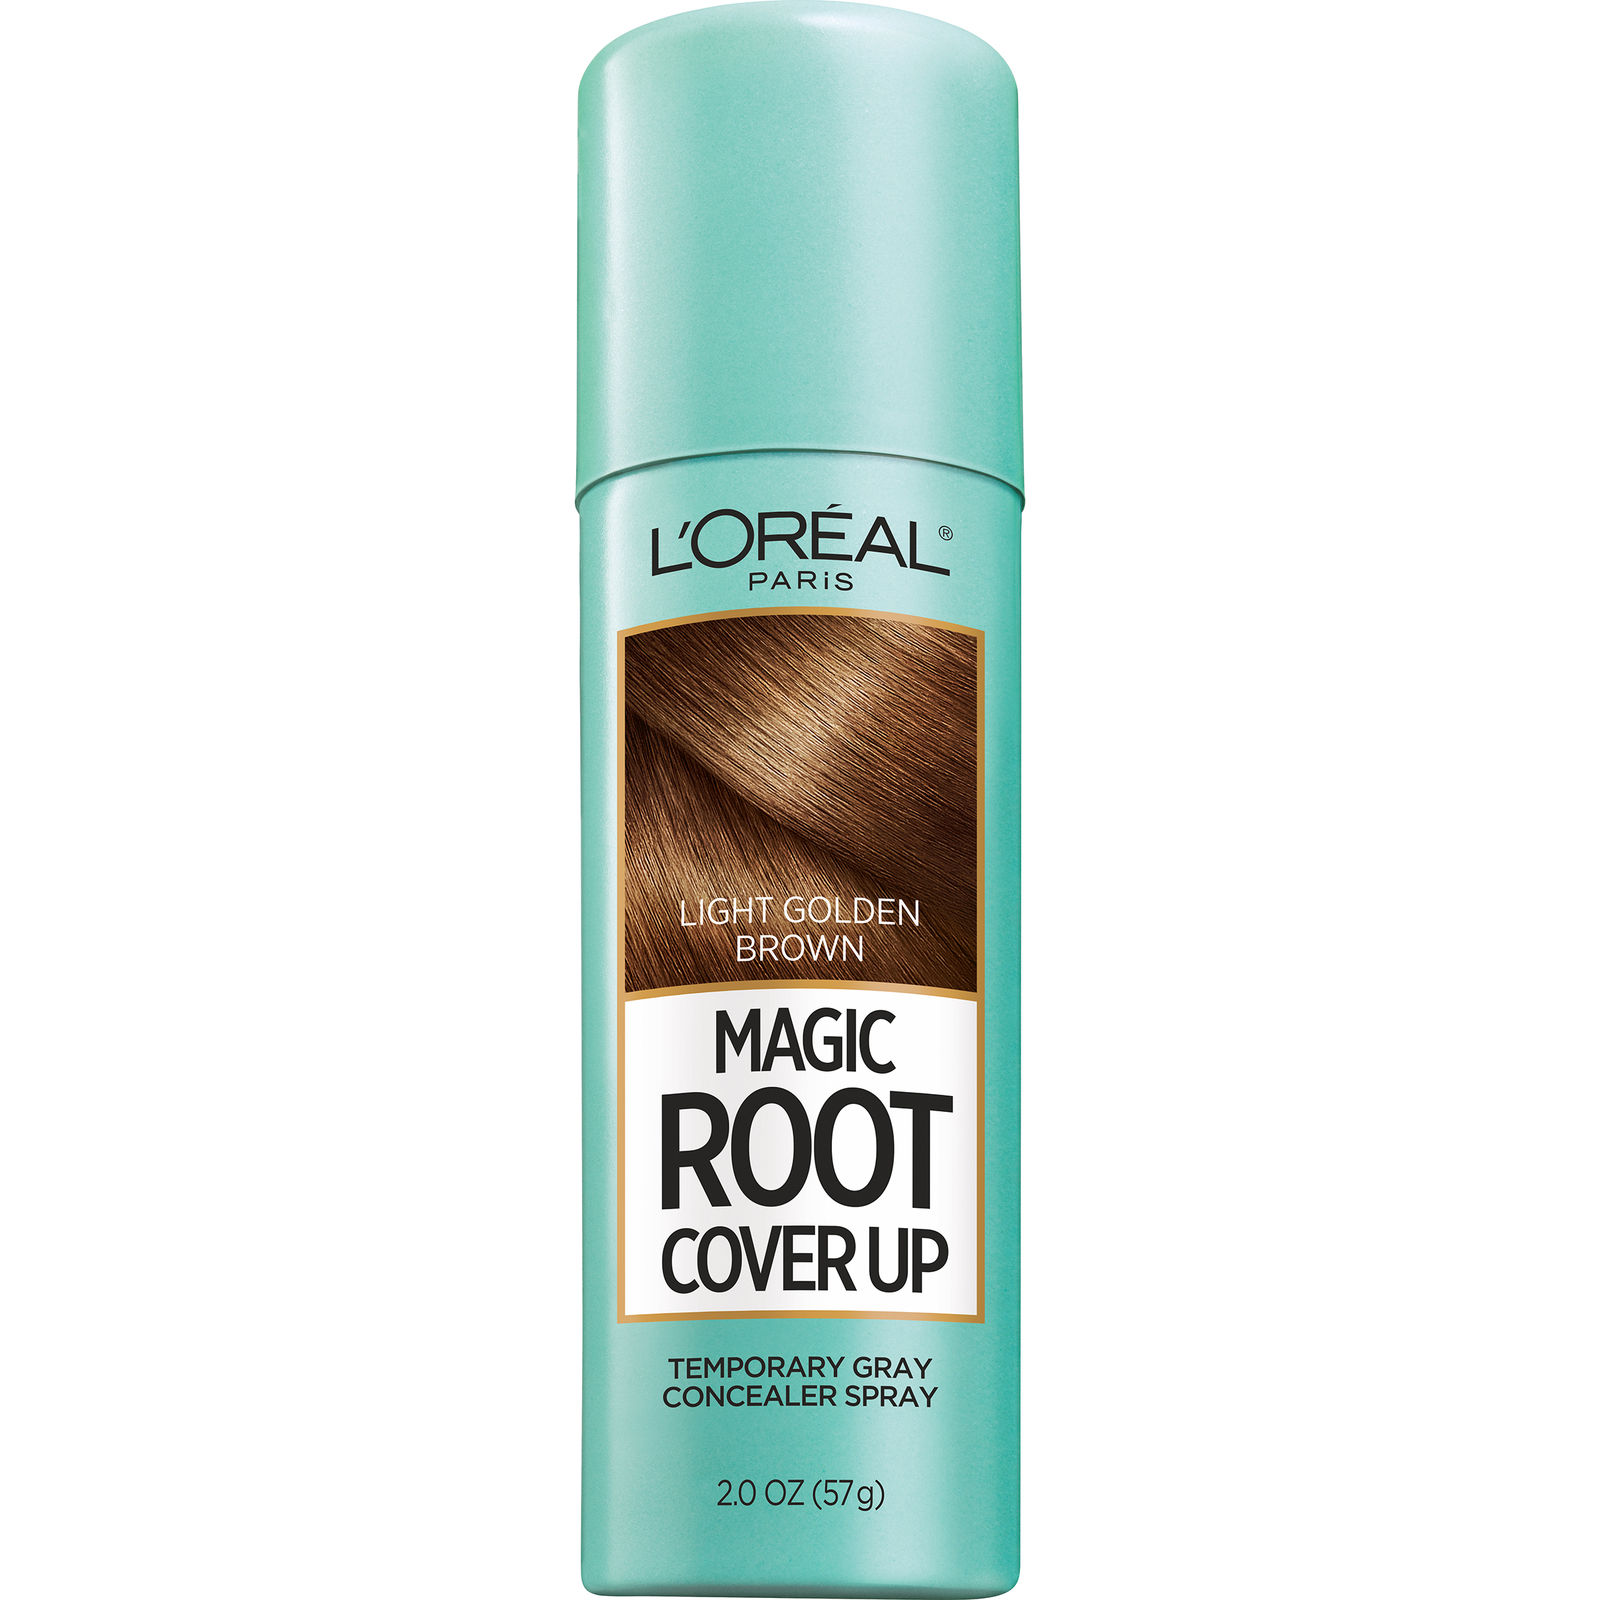 L’Oréal Paris Magic Root Cover Up Gray Concealer Spray—$8.99 + FREE Shipping!